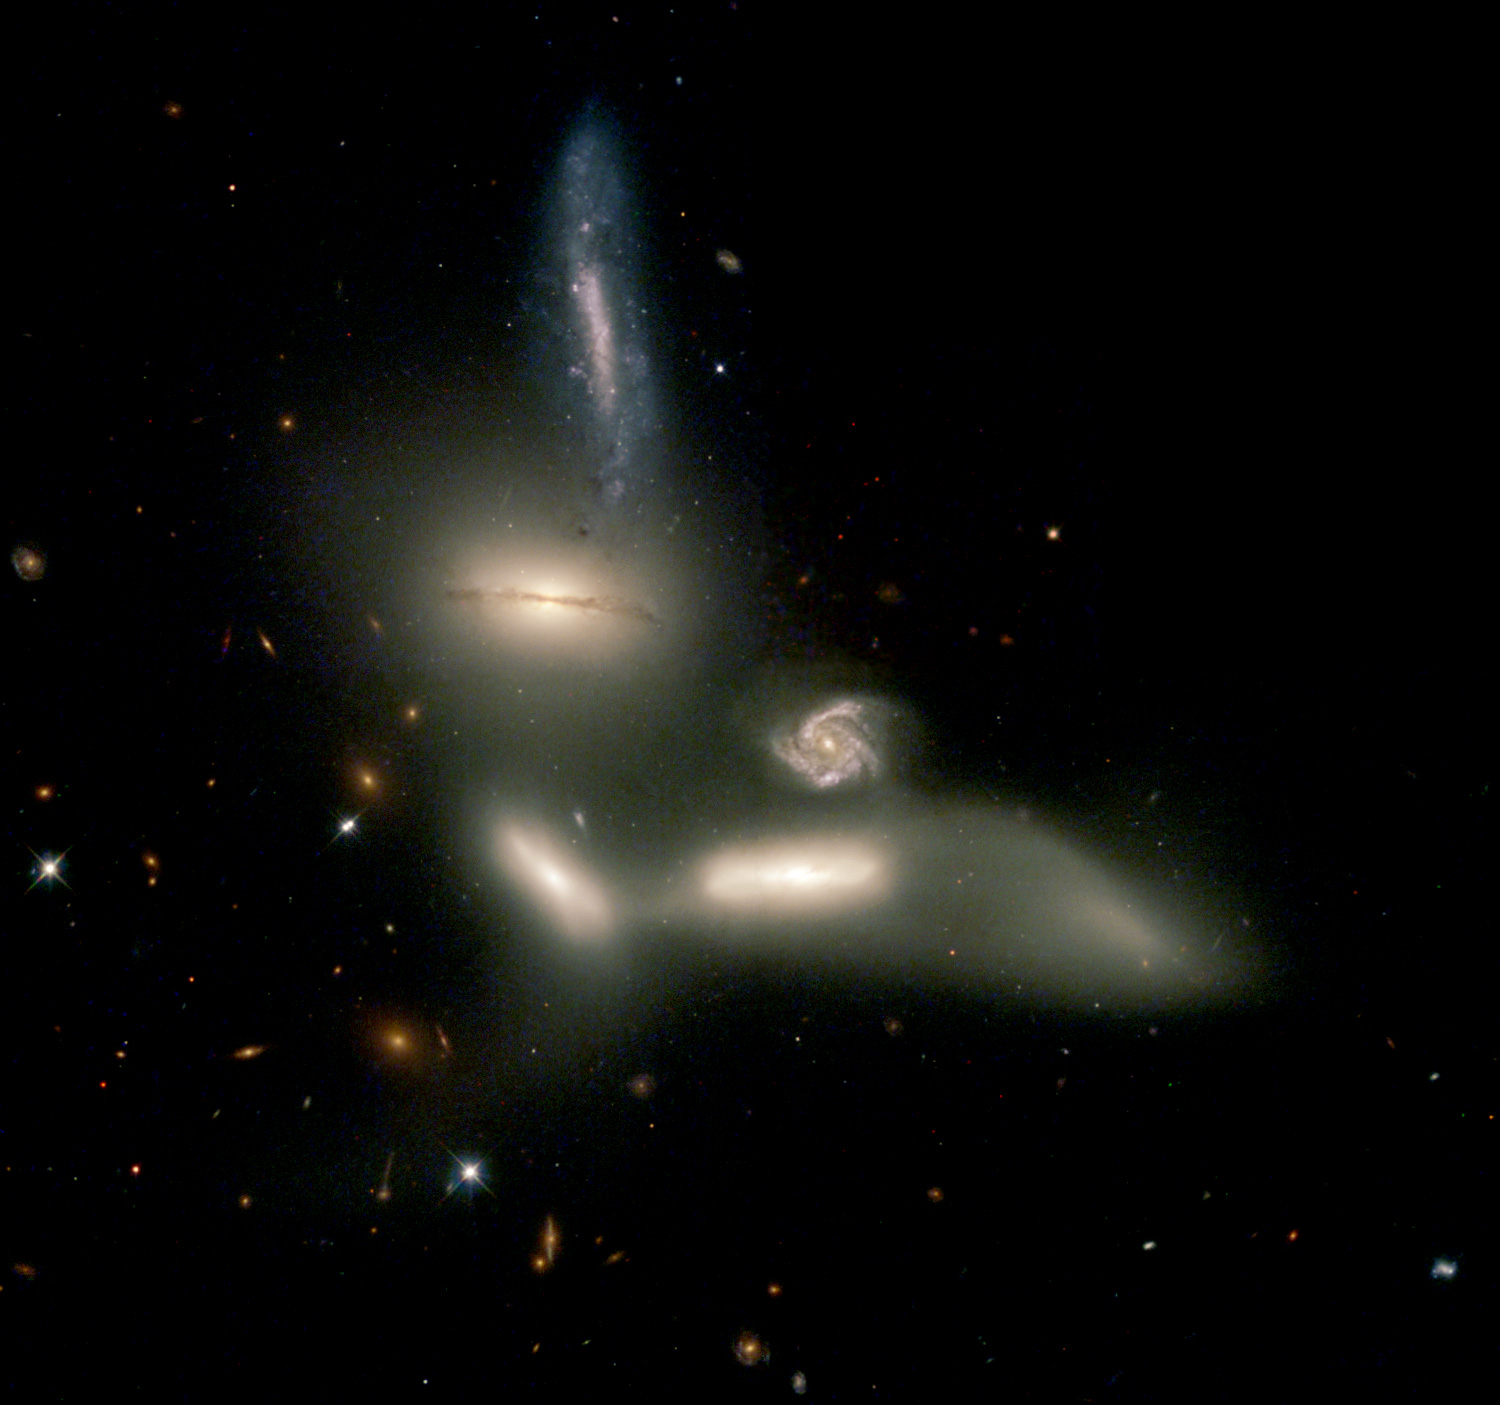 Image of a group of galaxies, the Seyfer's Sextet